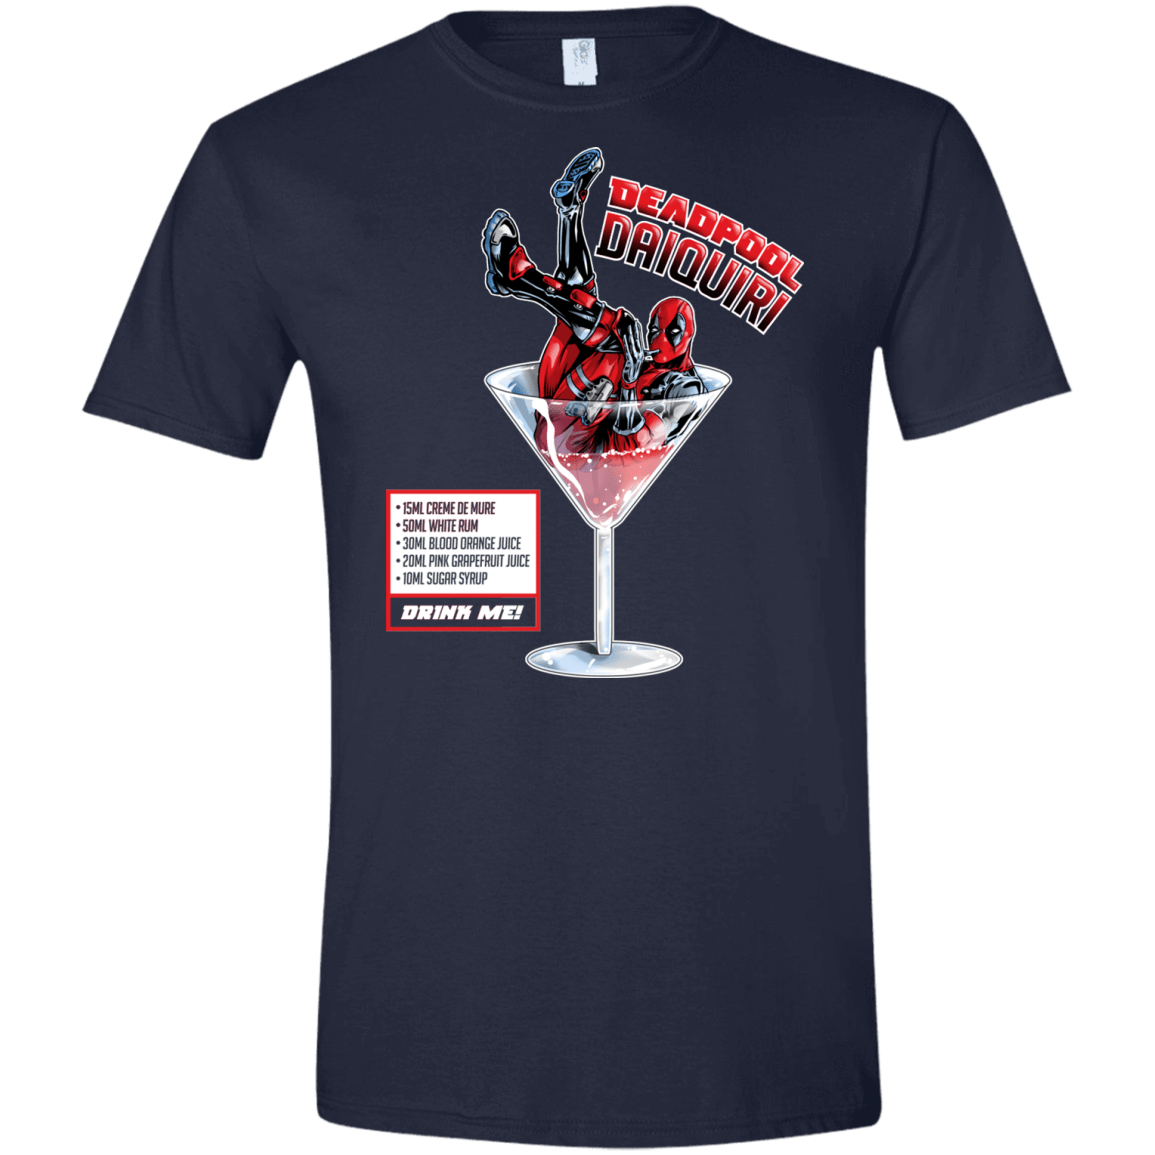 T-Shirts Navy / X-Small Deadpool Daiquiri Men's Semi-Fitted Softstyle